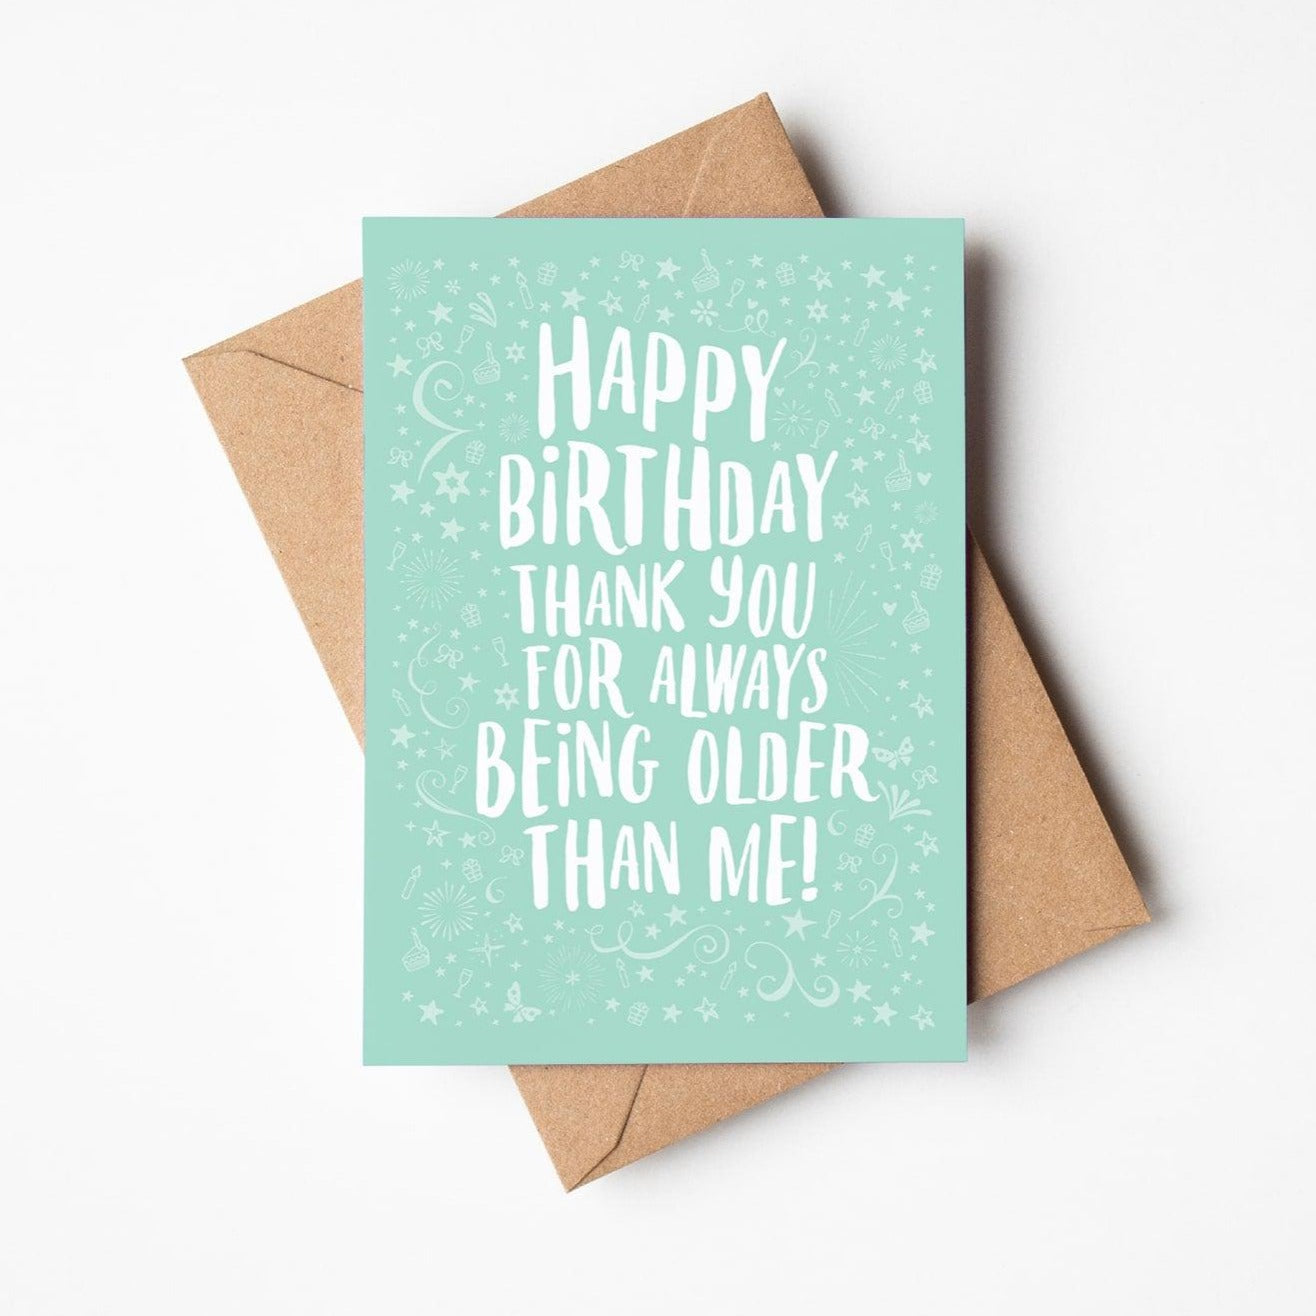 Happy Birthday thank you for always being older than me! birthday card 